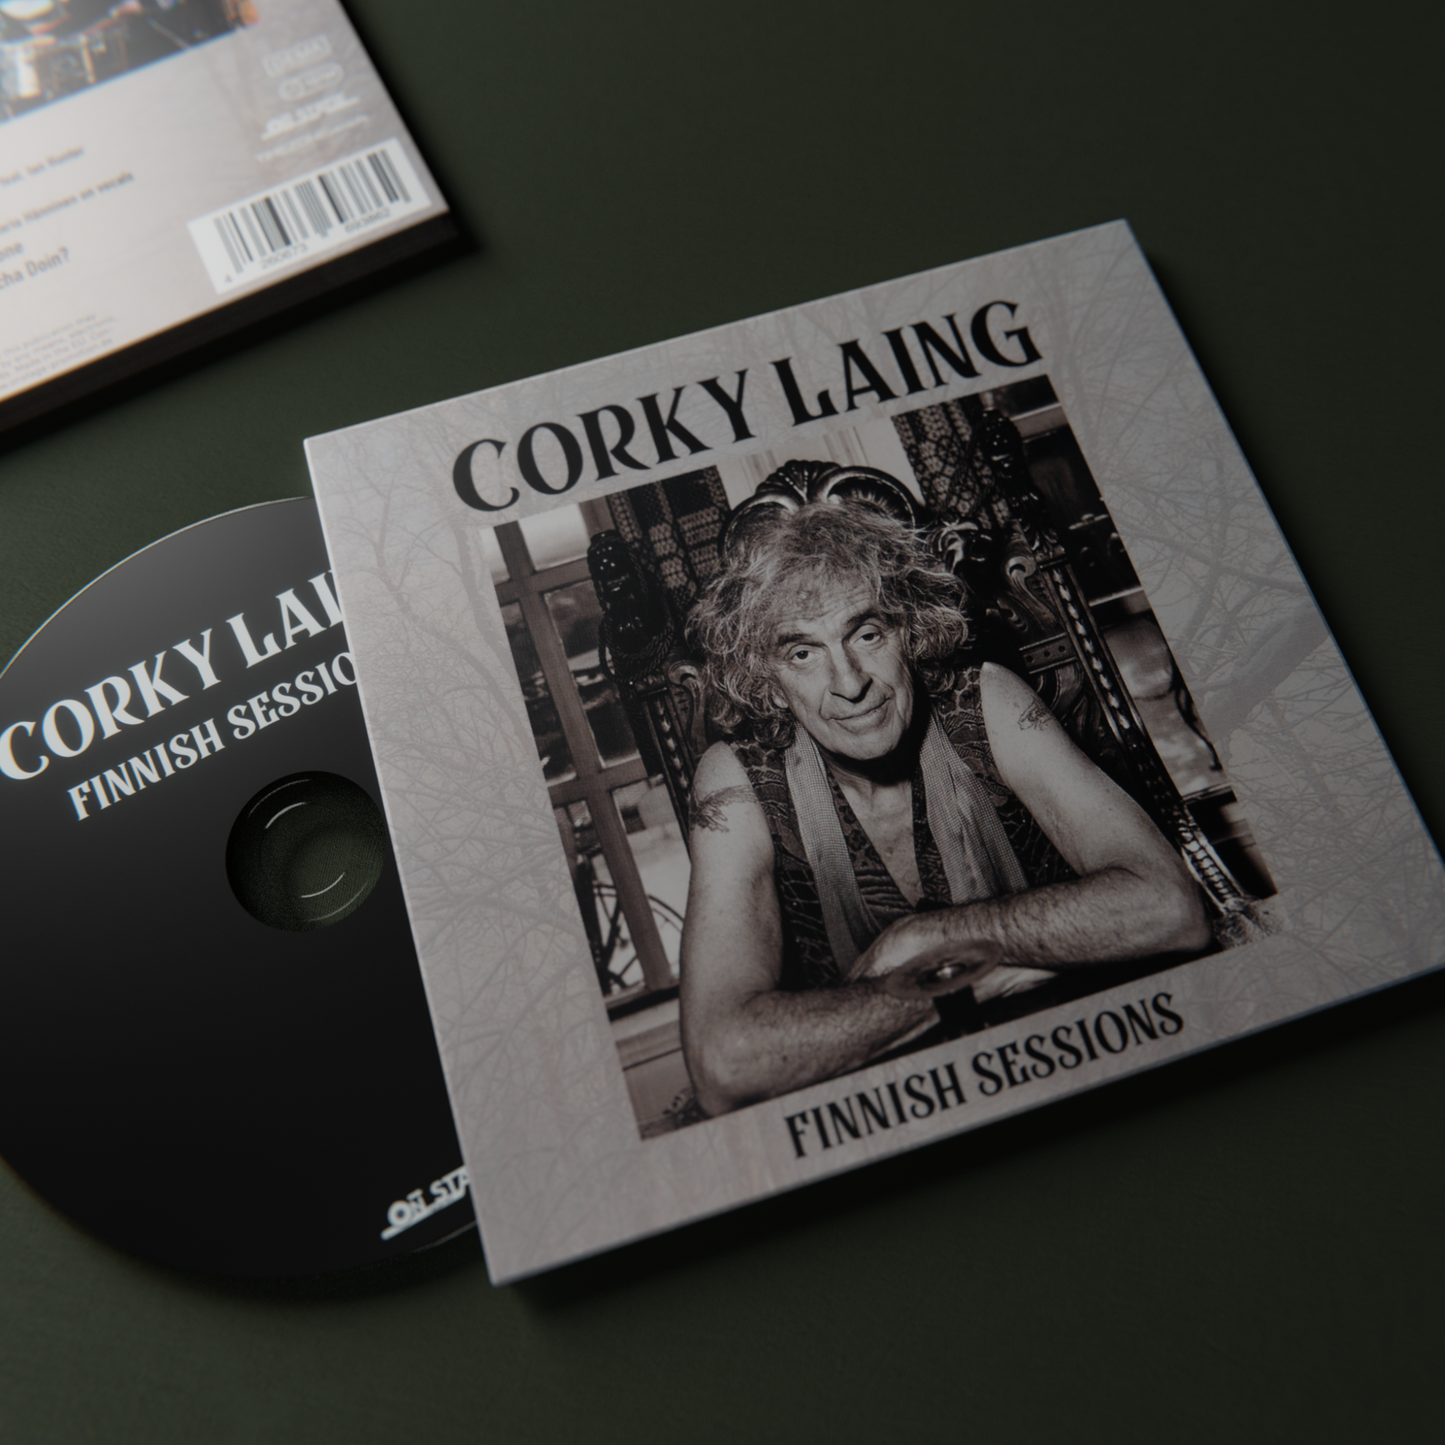 Corky Laing's MOUNTAIN, Finnish Sessions, CD